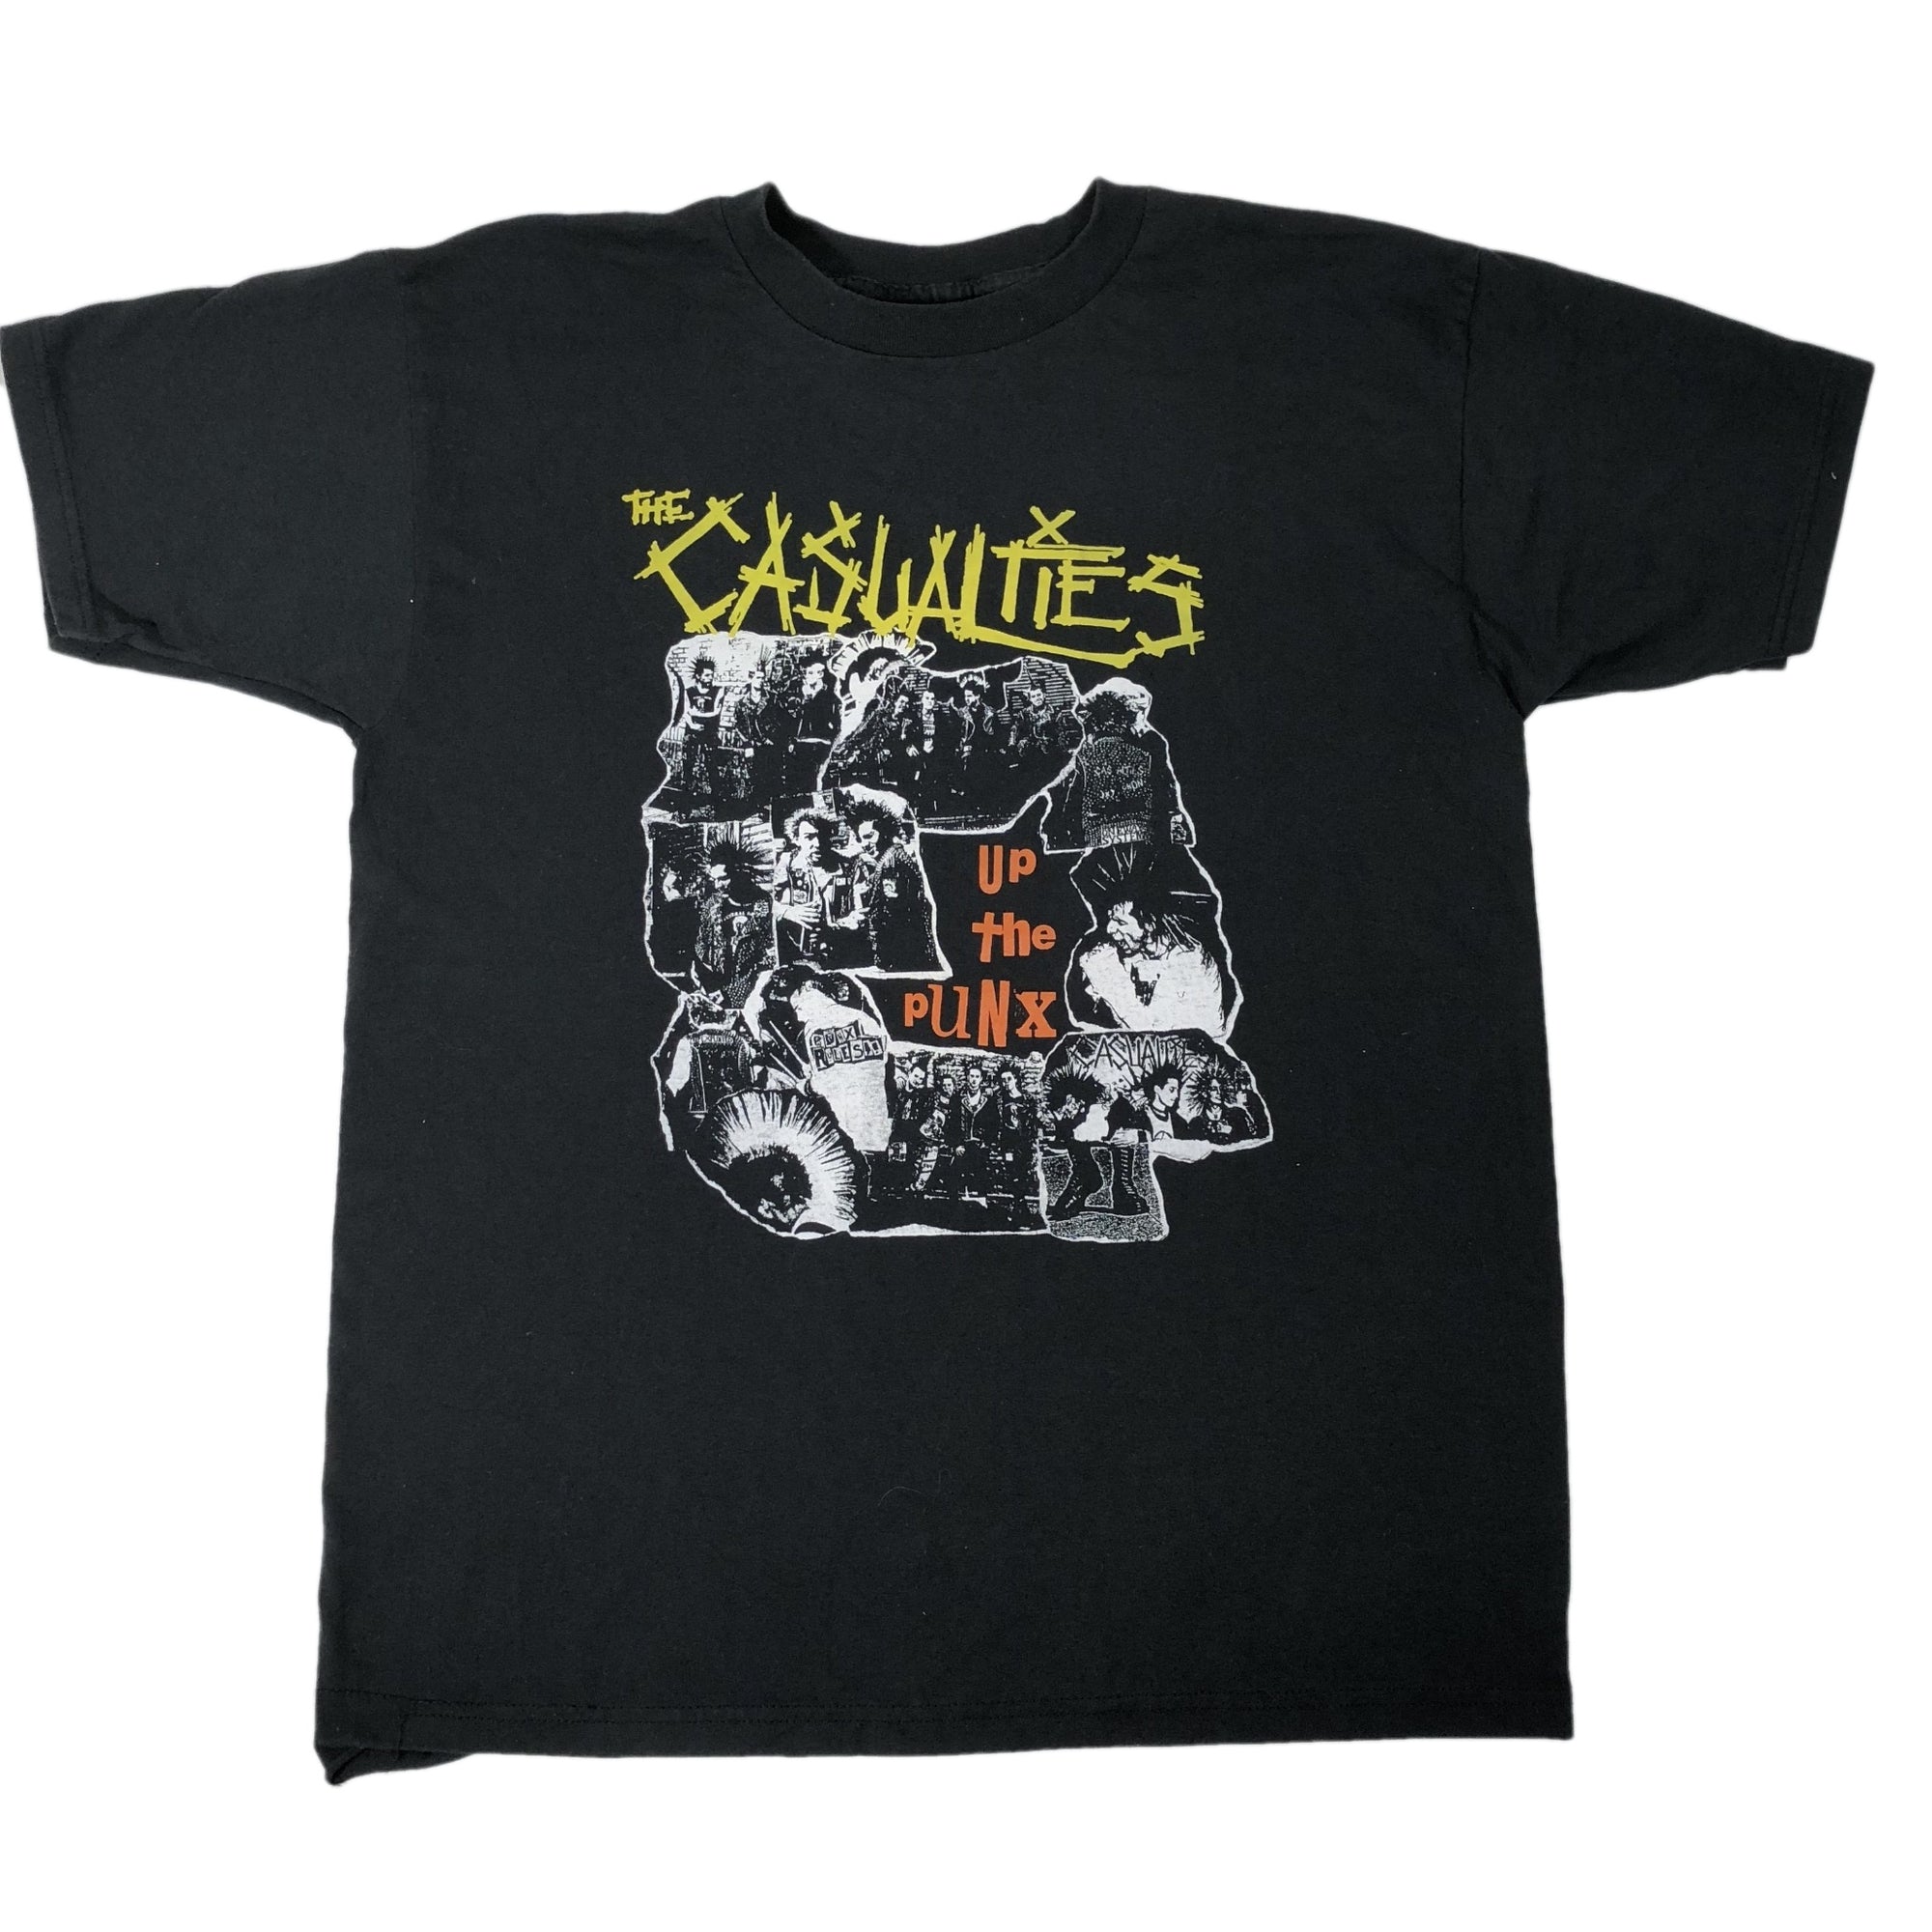 Vintage The Casualties "Up The Punx" T-Shirt - jointcustodydc